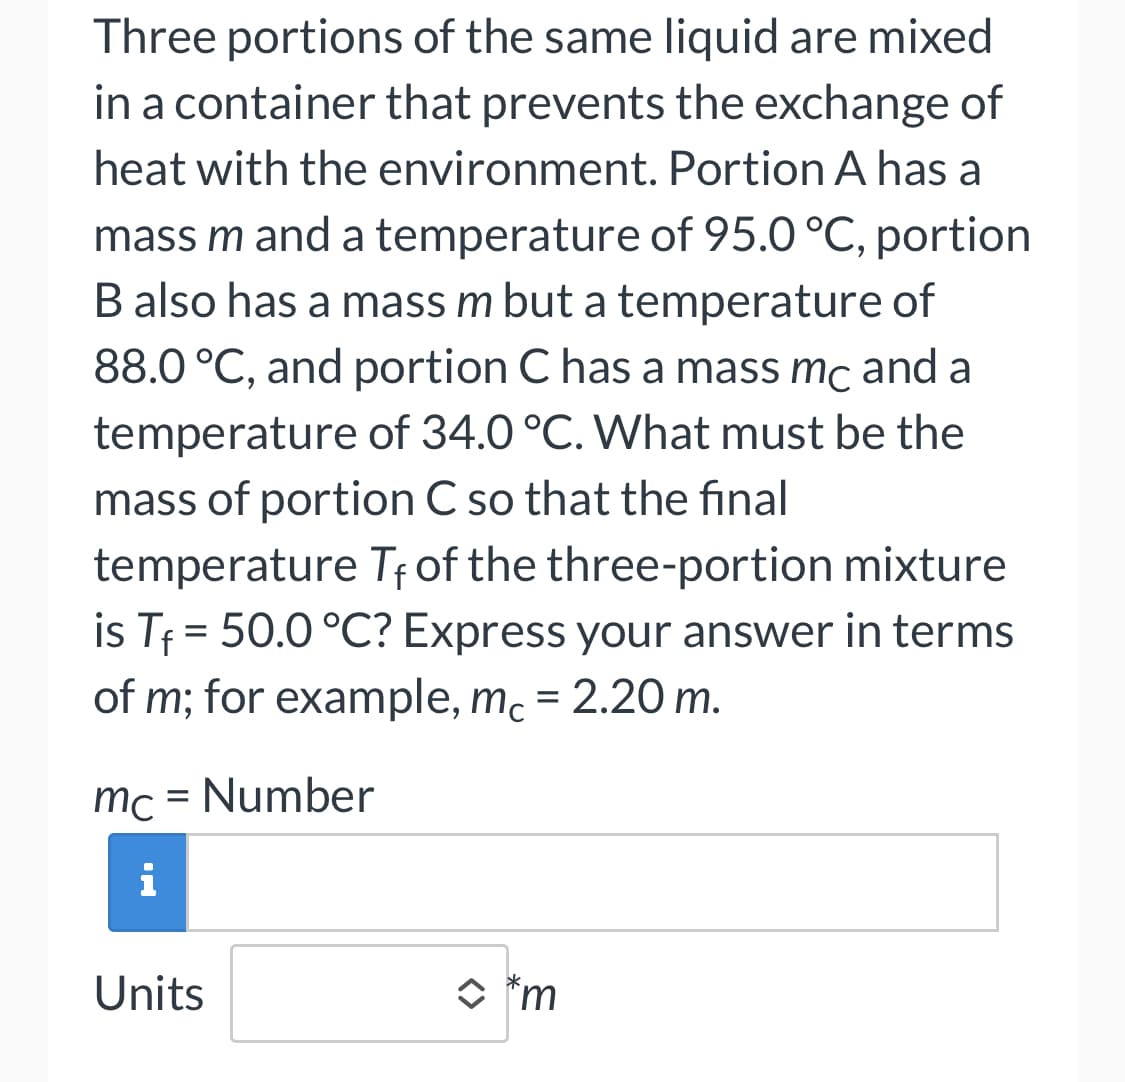 Three portions of the same liquid are mixed
in a container that prevents the exchange of
heat with the environment. Portion A has a
mass m and a temperature of 95.0 °C, portion
B also has a mass m but a temperature of
88.0 °C, and portion C has a mass mc and a
temperature of 34.0 °C. What must be the
mass of portion C so that the final
temperature Tf of the three-portion mixture
is T₁ = 50.0 °C? Express your answer in terms
of m; for example, mc = 2.20 m.
mc = Number
i
Units
*m